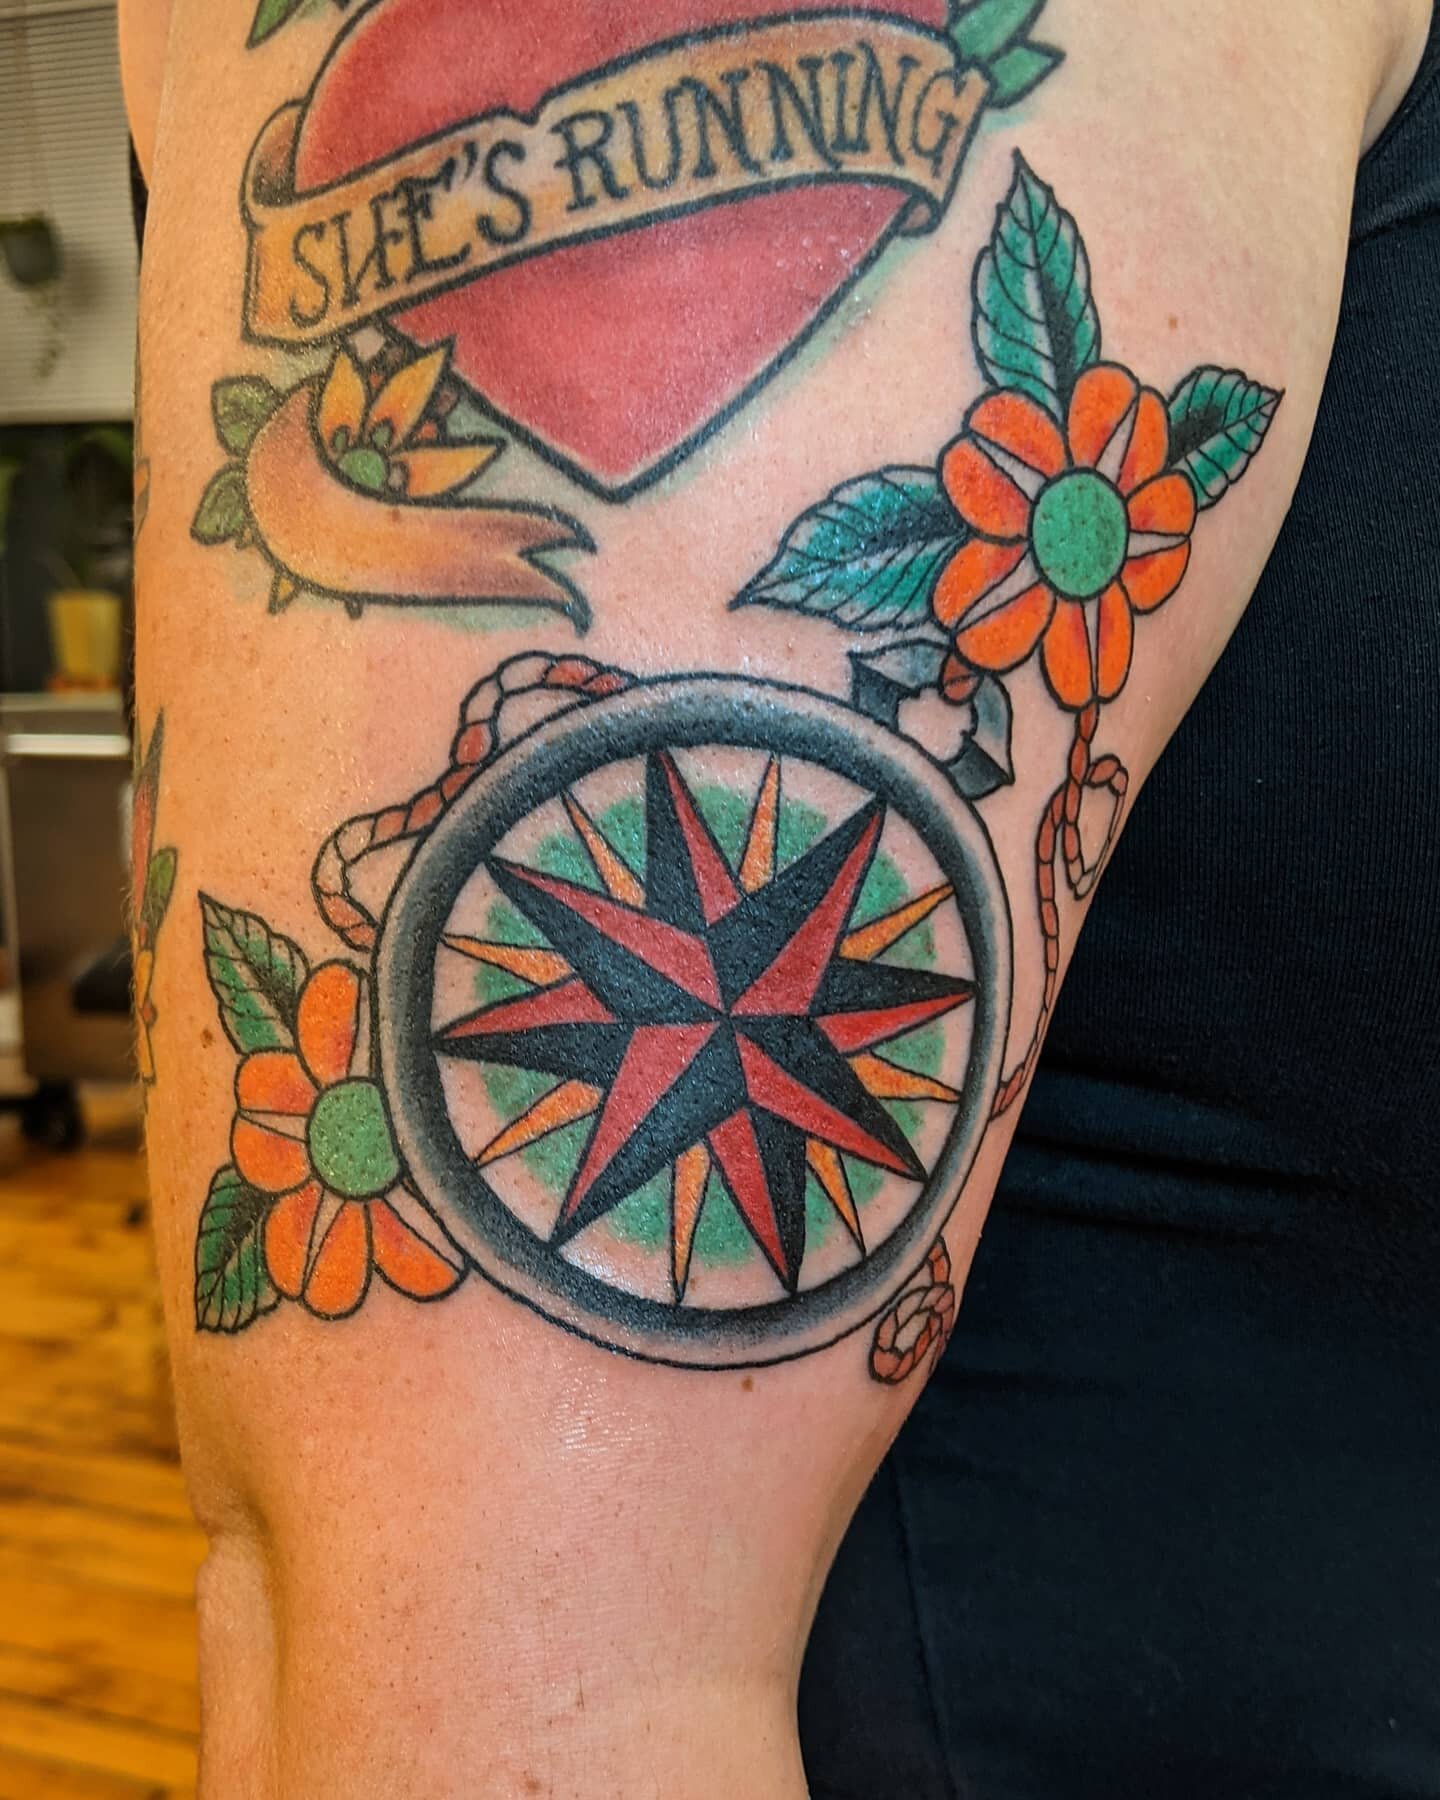 Thanks for letting me add to your collection, Julia!

#threeriverstattoo #traditionaltattoo #chromatattooink #compasstattoo #goodmorningjulia #brightandbold